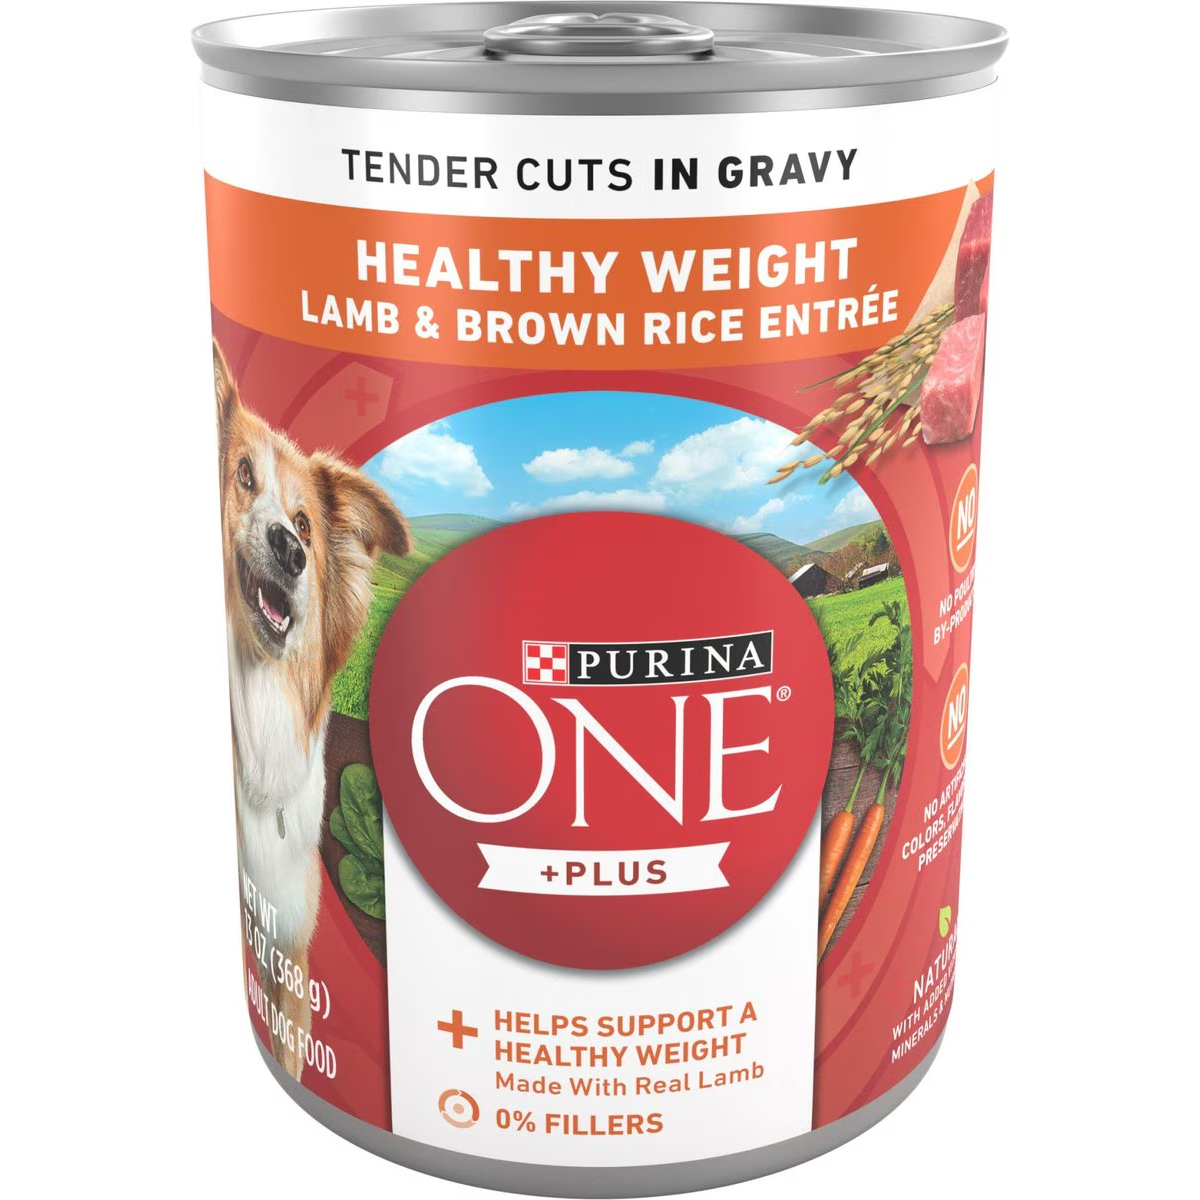 Purina ONE +Plus Adult Tender Cuts in Gravy Healthy Weight Lamb & Brown Rice Entree Canned Dog Food